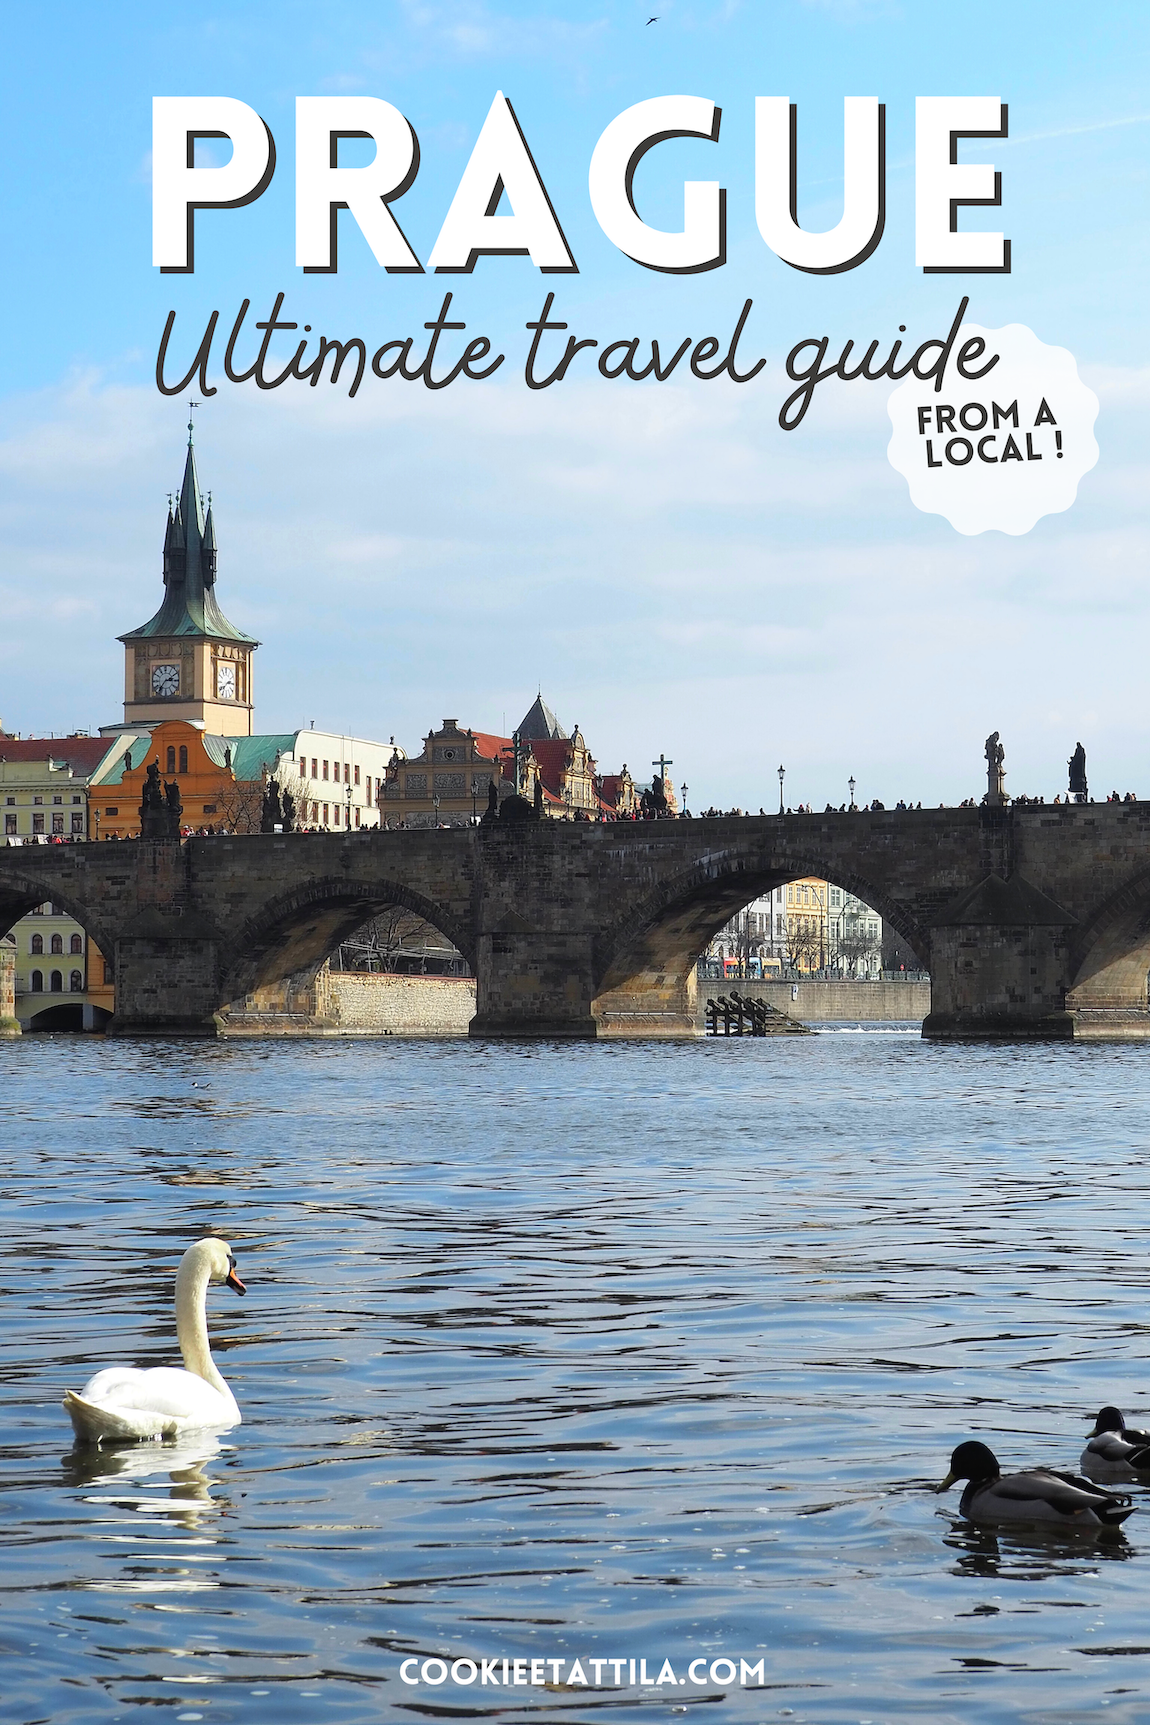 The ultimate insiders travel guide to Prague from a local, including tips, where to eat, must see and off the beaten path